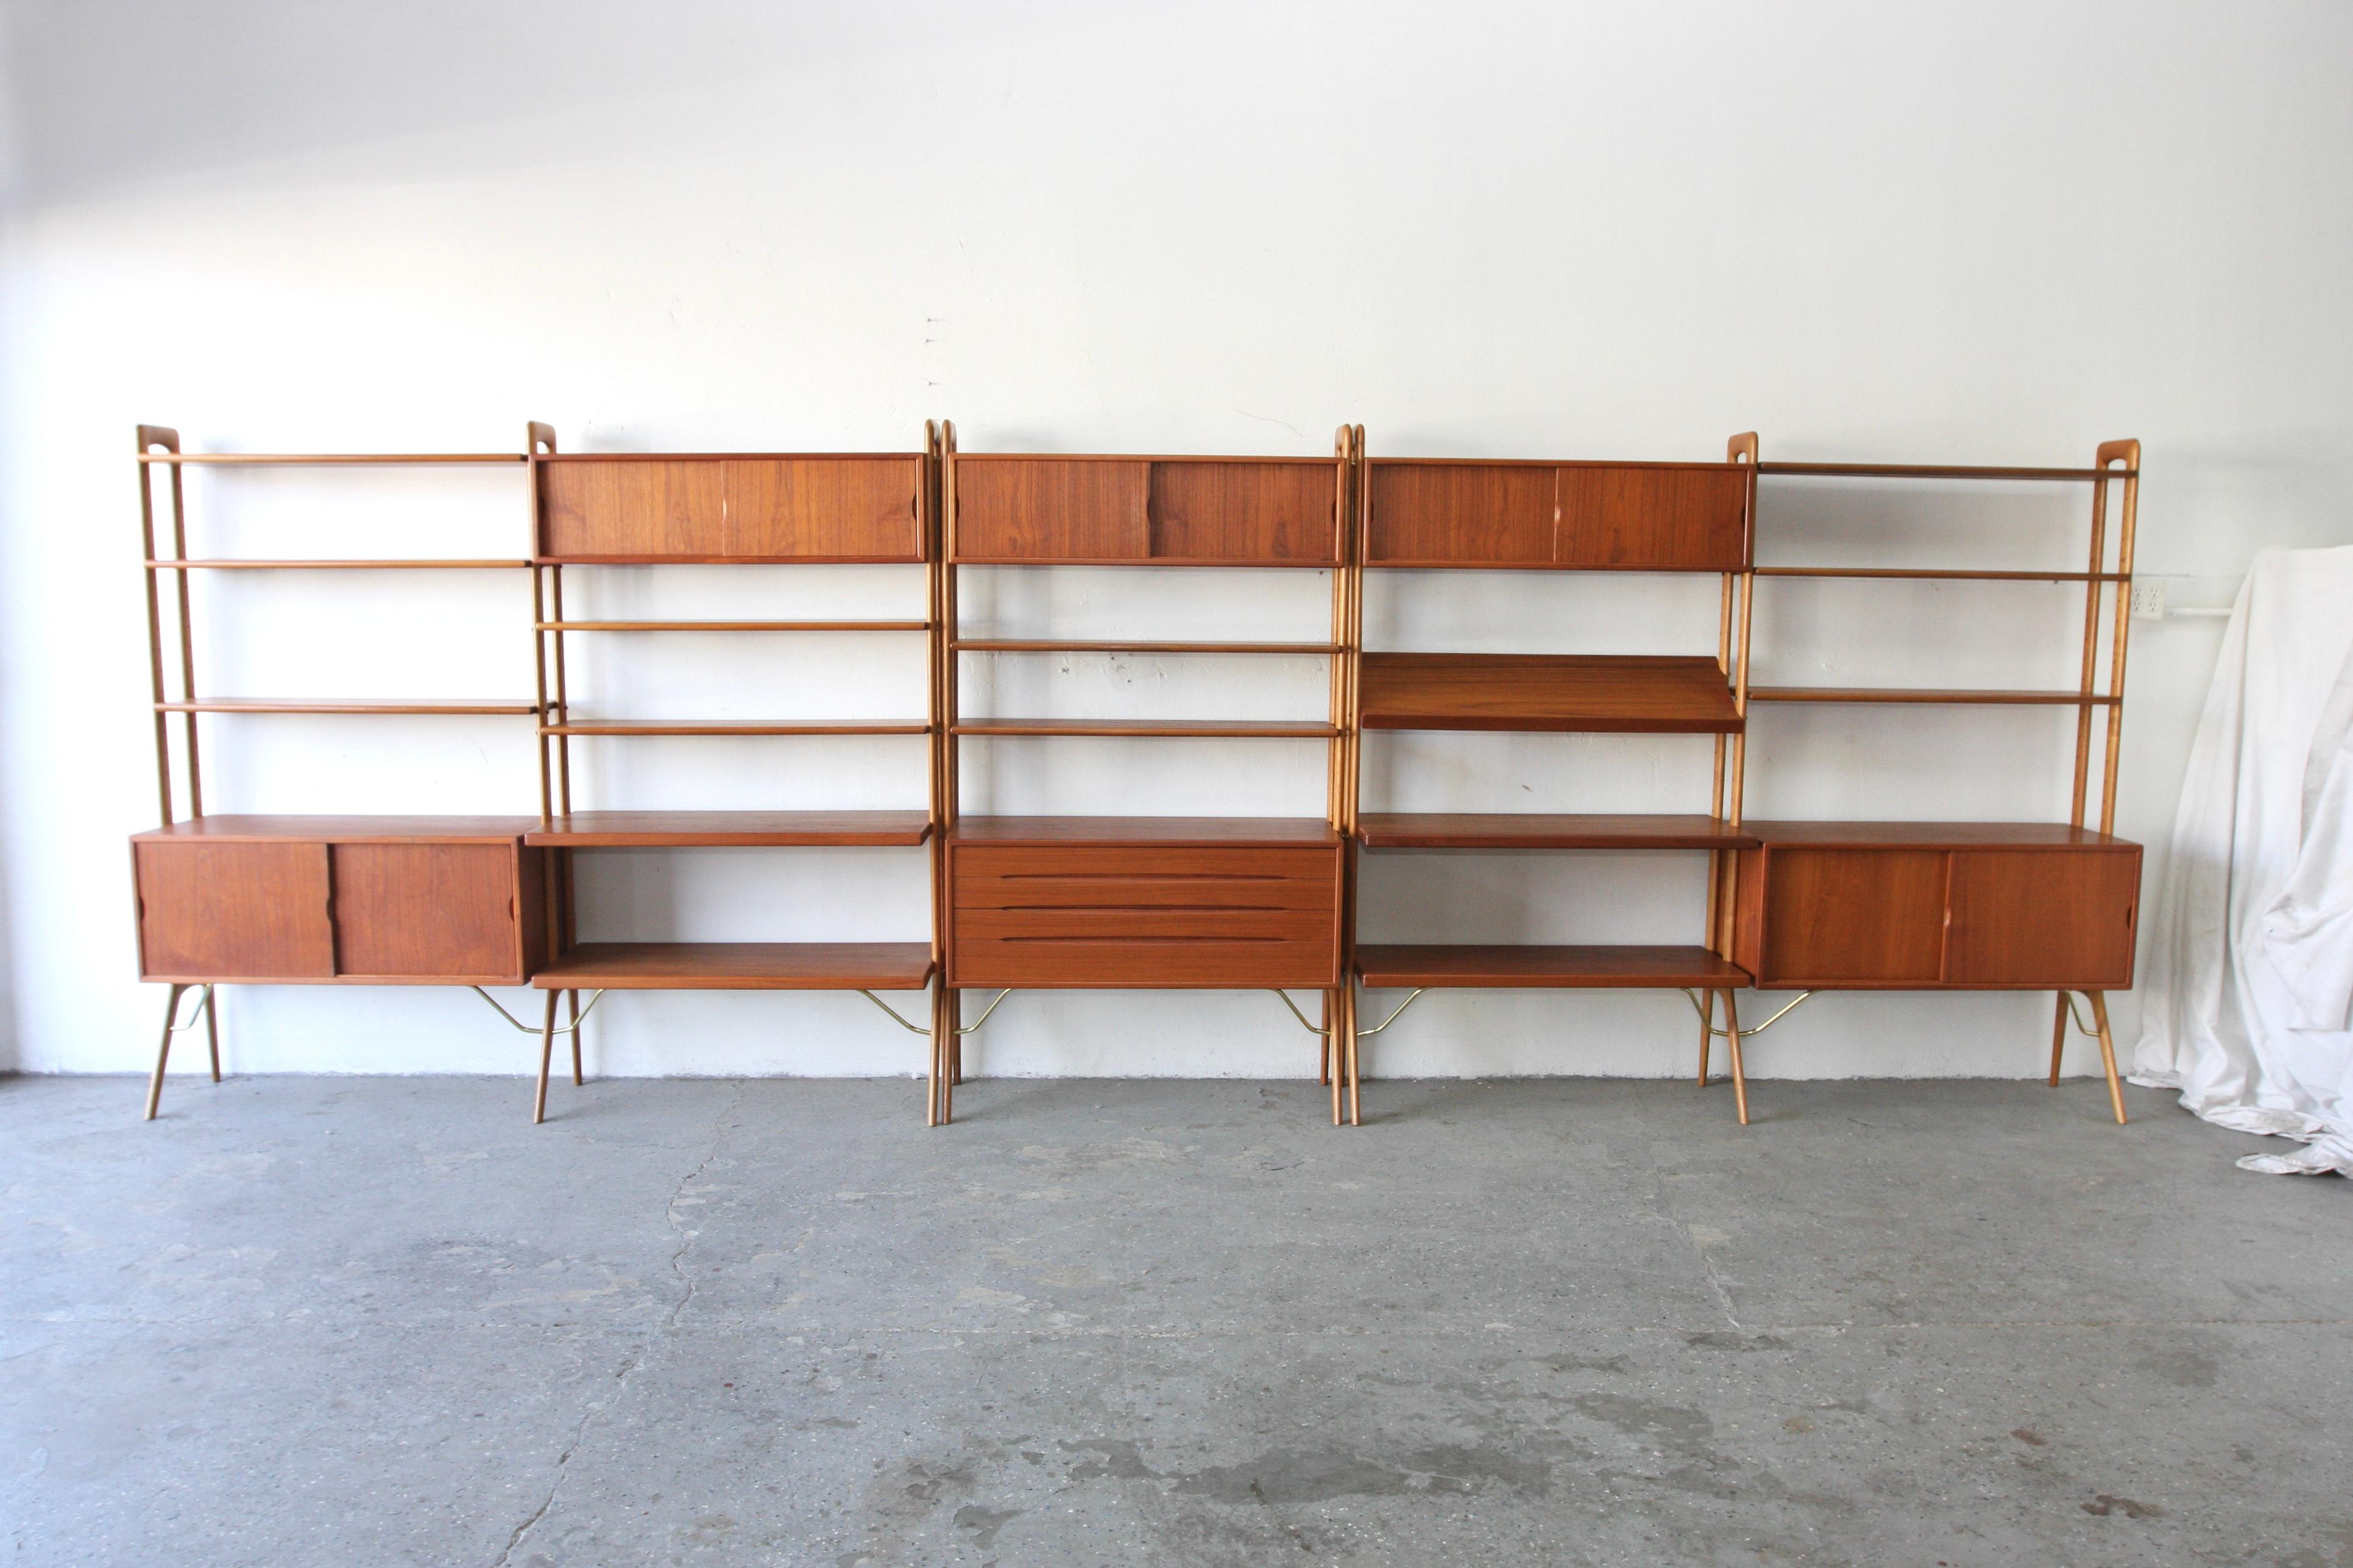 Extremely rare wall unit / room divider designed by Kurt Ostervig for KP Mobler. This gorgeous, teak system is fully finished on the back, allowing for use as a freestanding room divider. It also modular can add or rearrange shelves and cabinets ,